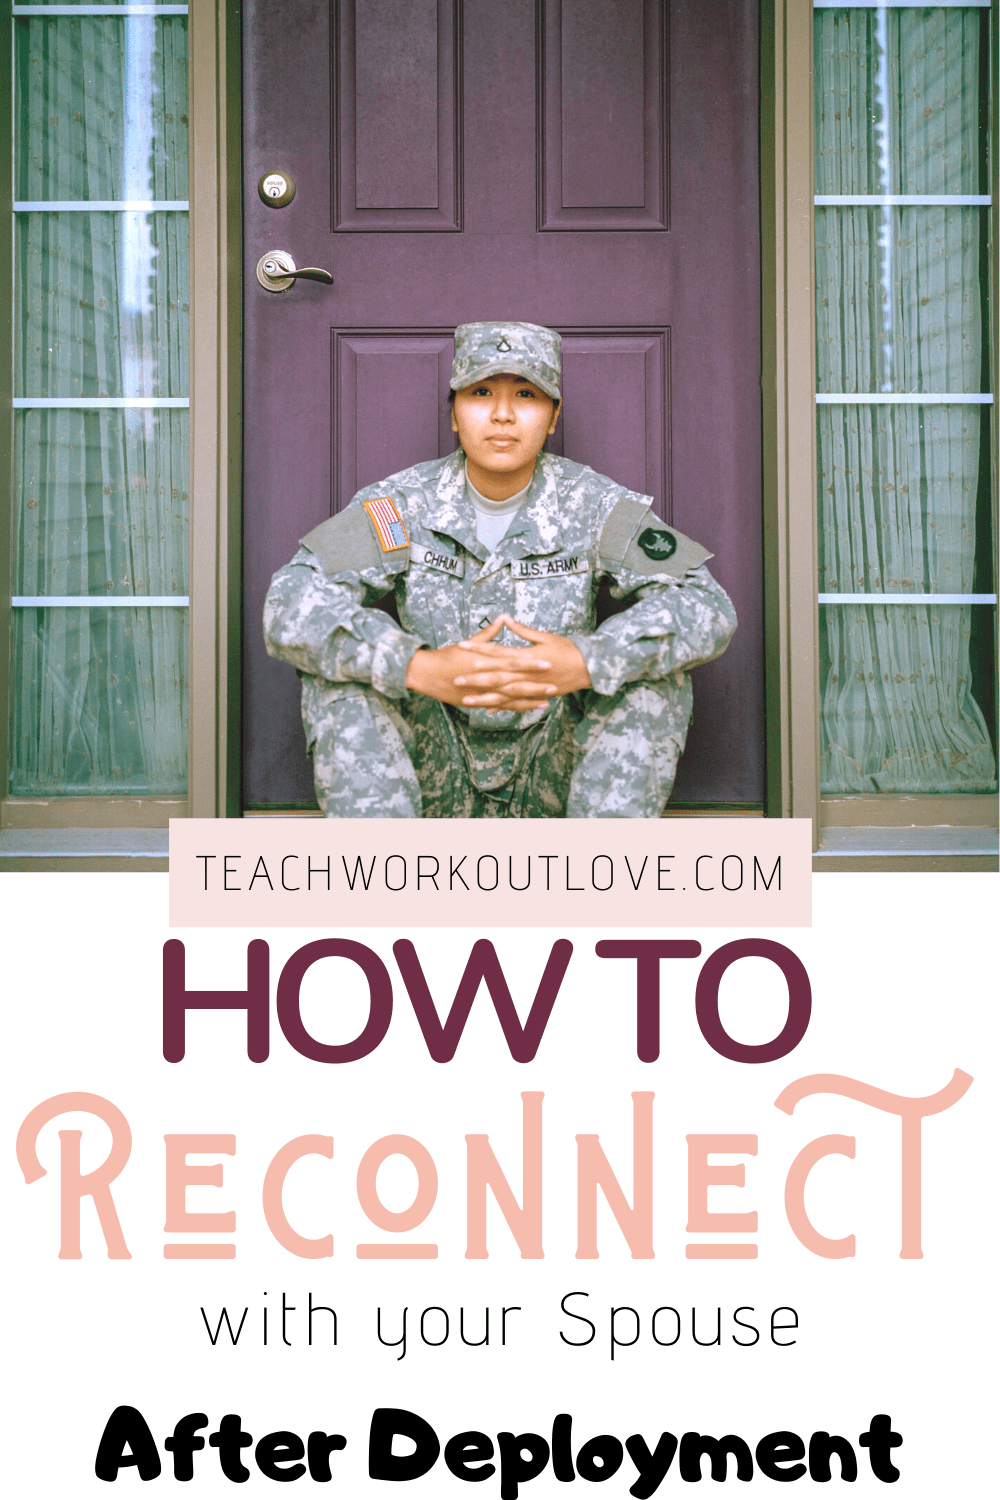 When your spouse arrives home after a long deployment, chances are that everyone in your family will be dealing with many different emotions.